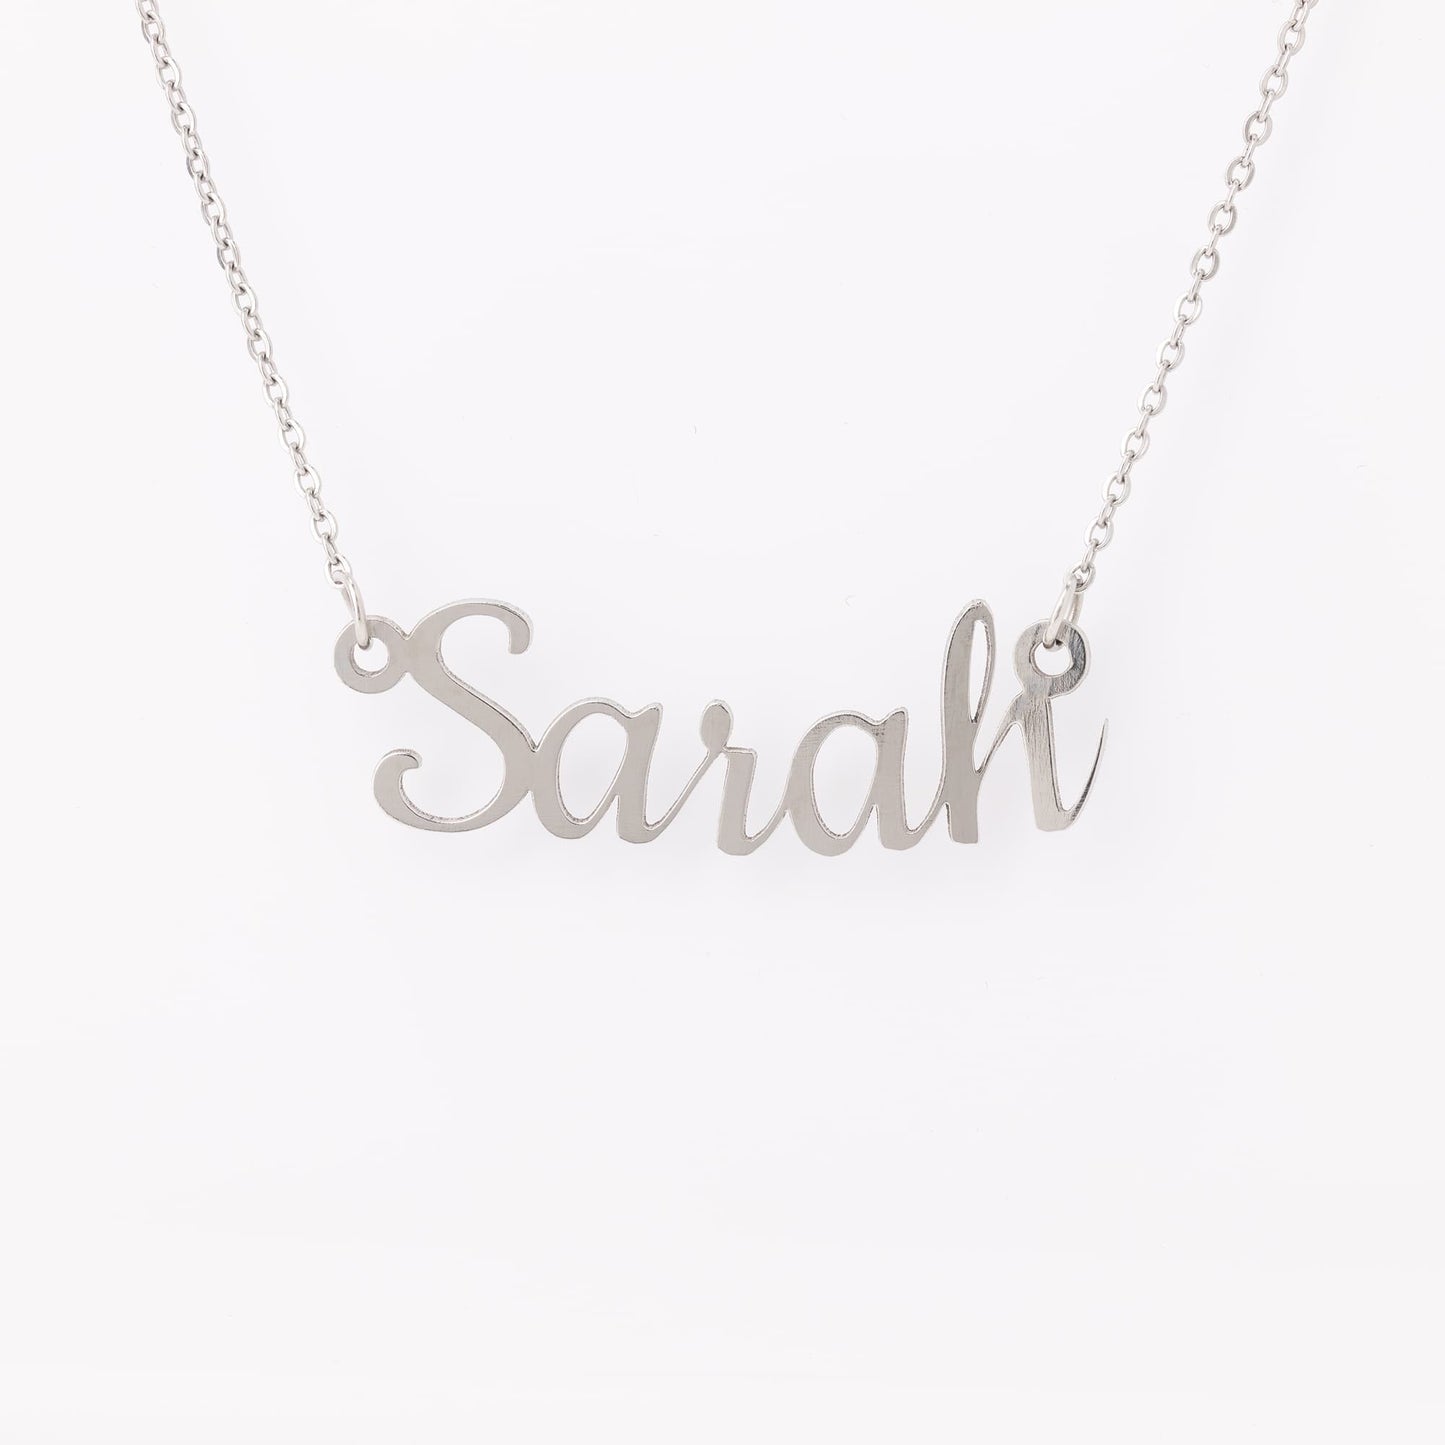 Customized Name Necklace [Enter Name of Your Choice]